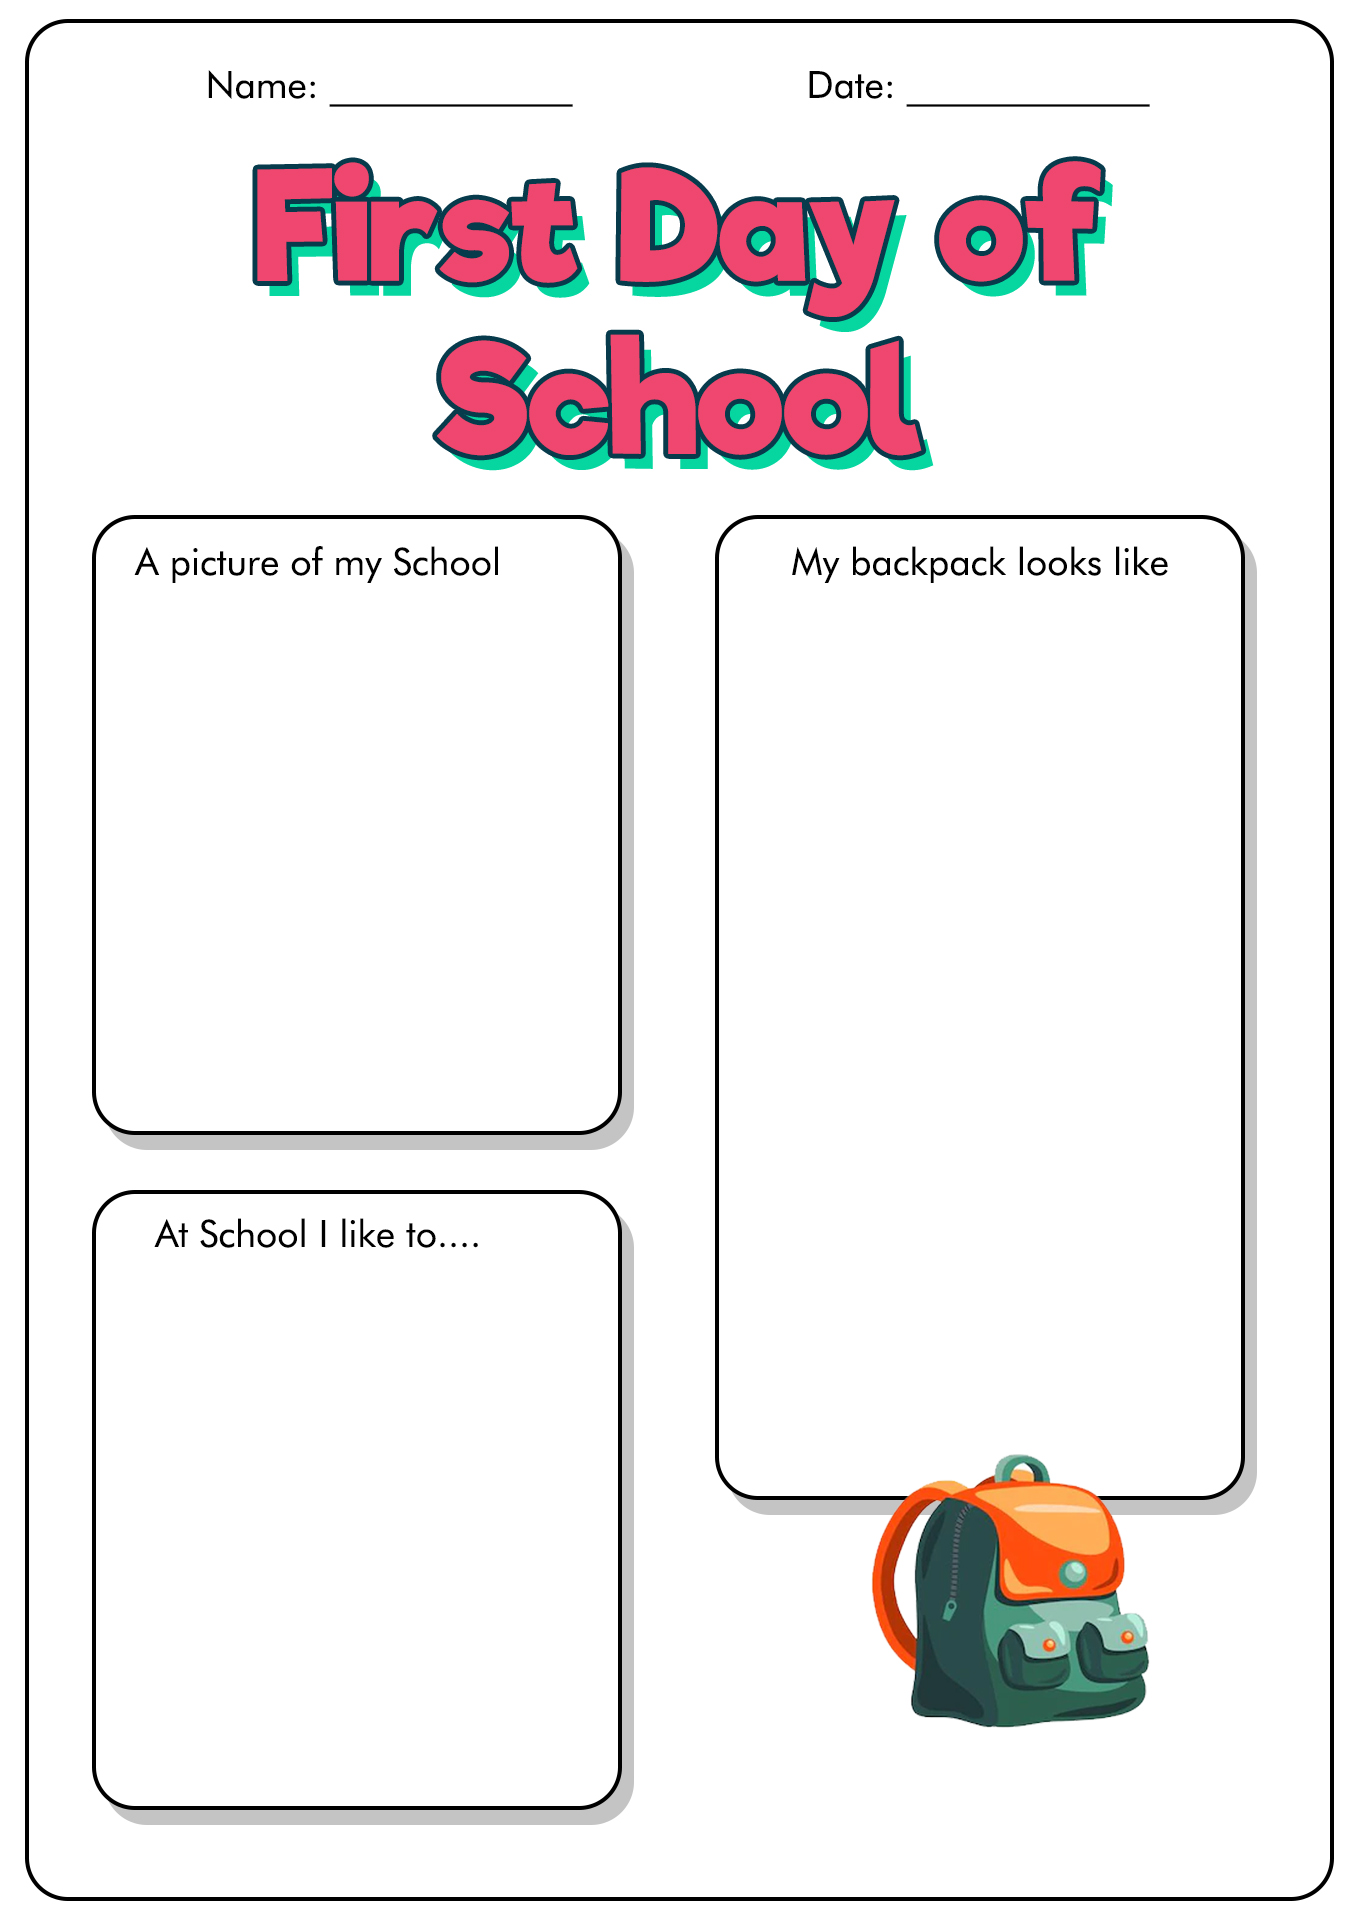 Welcome Back to School Activity Sheets Image